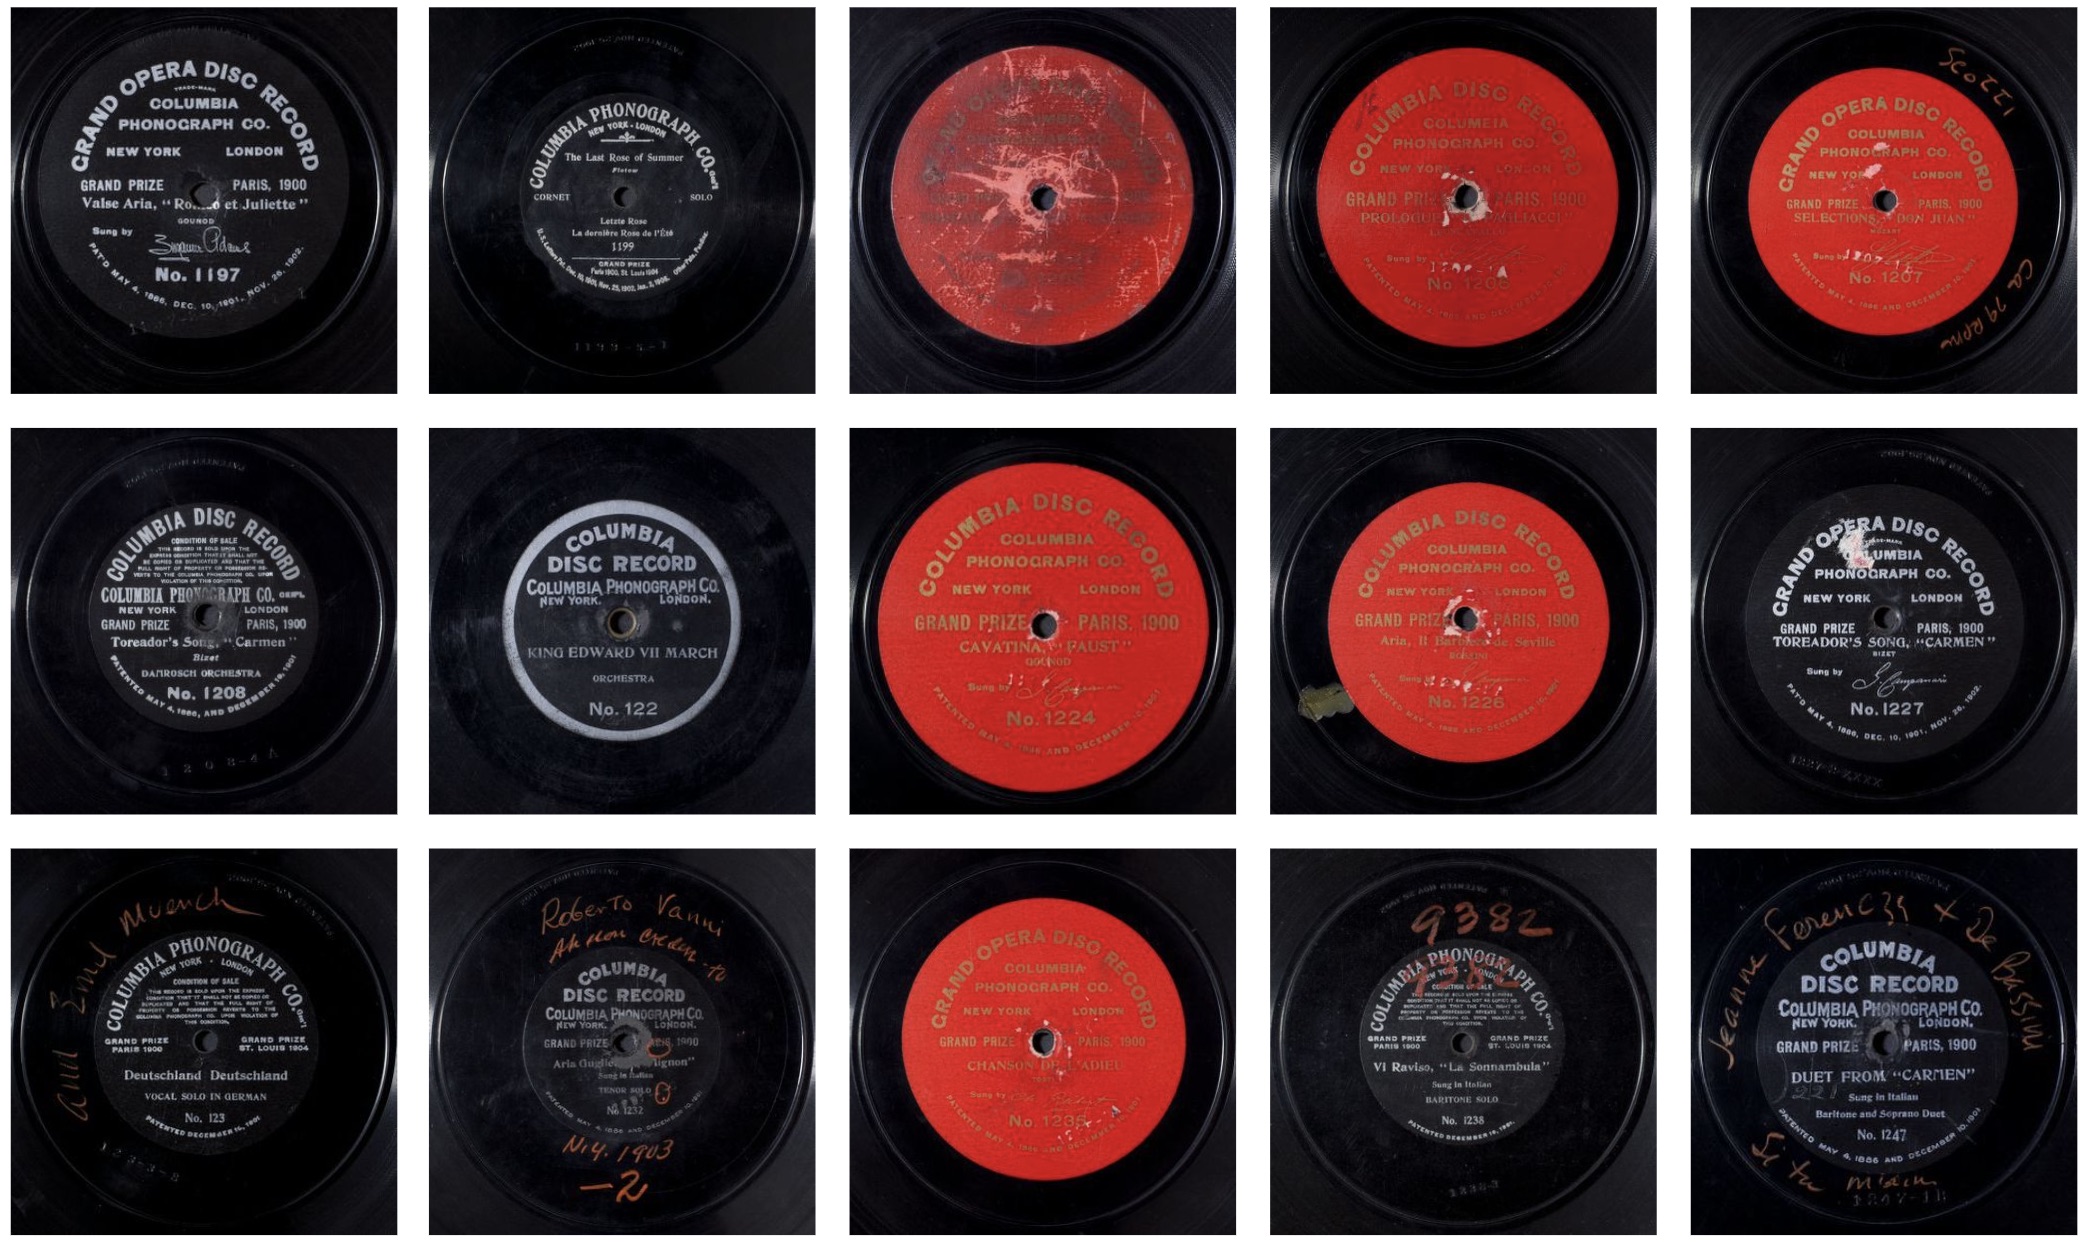 All Sound Recordings Prior to 1923 Will Enter the US Public Domain in 2022